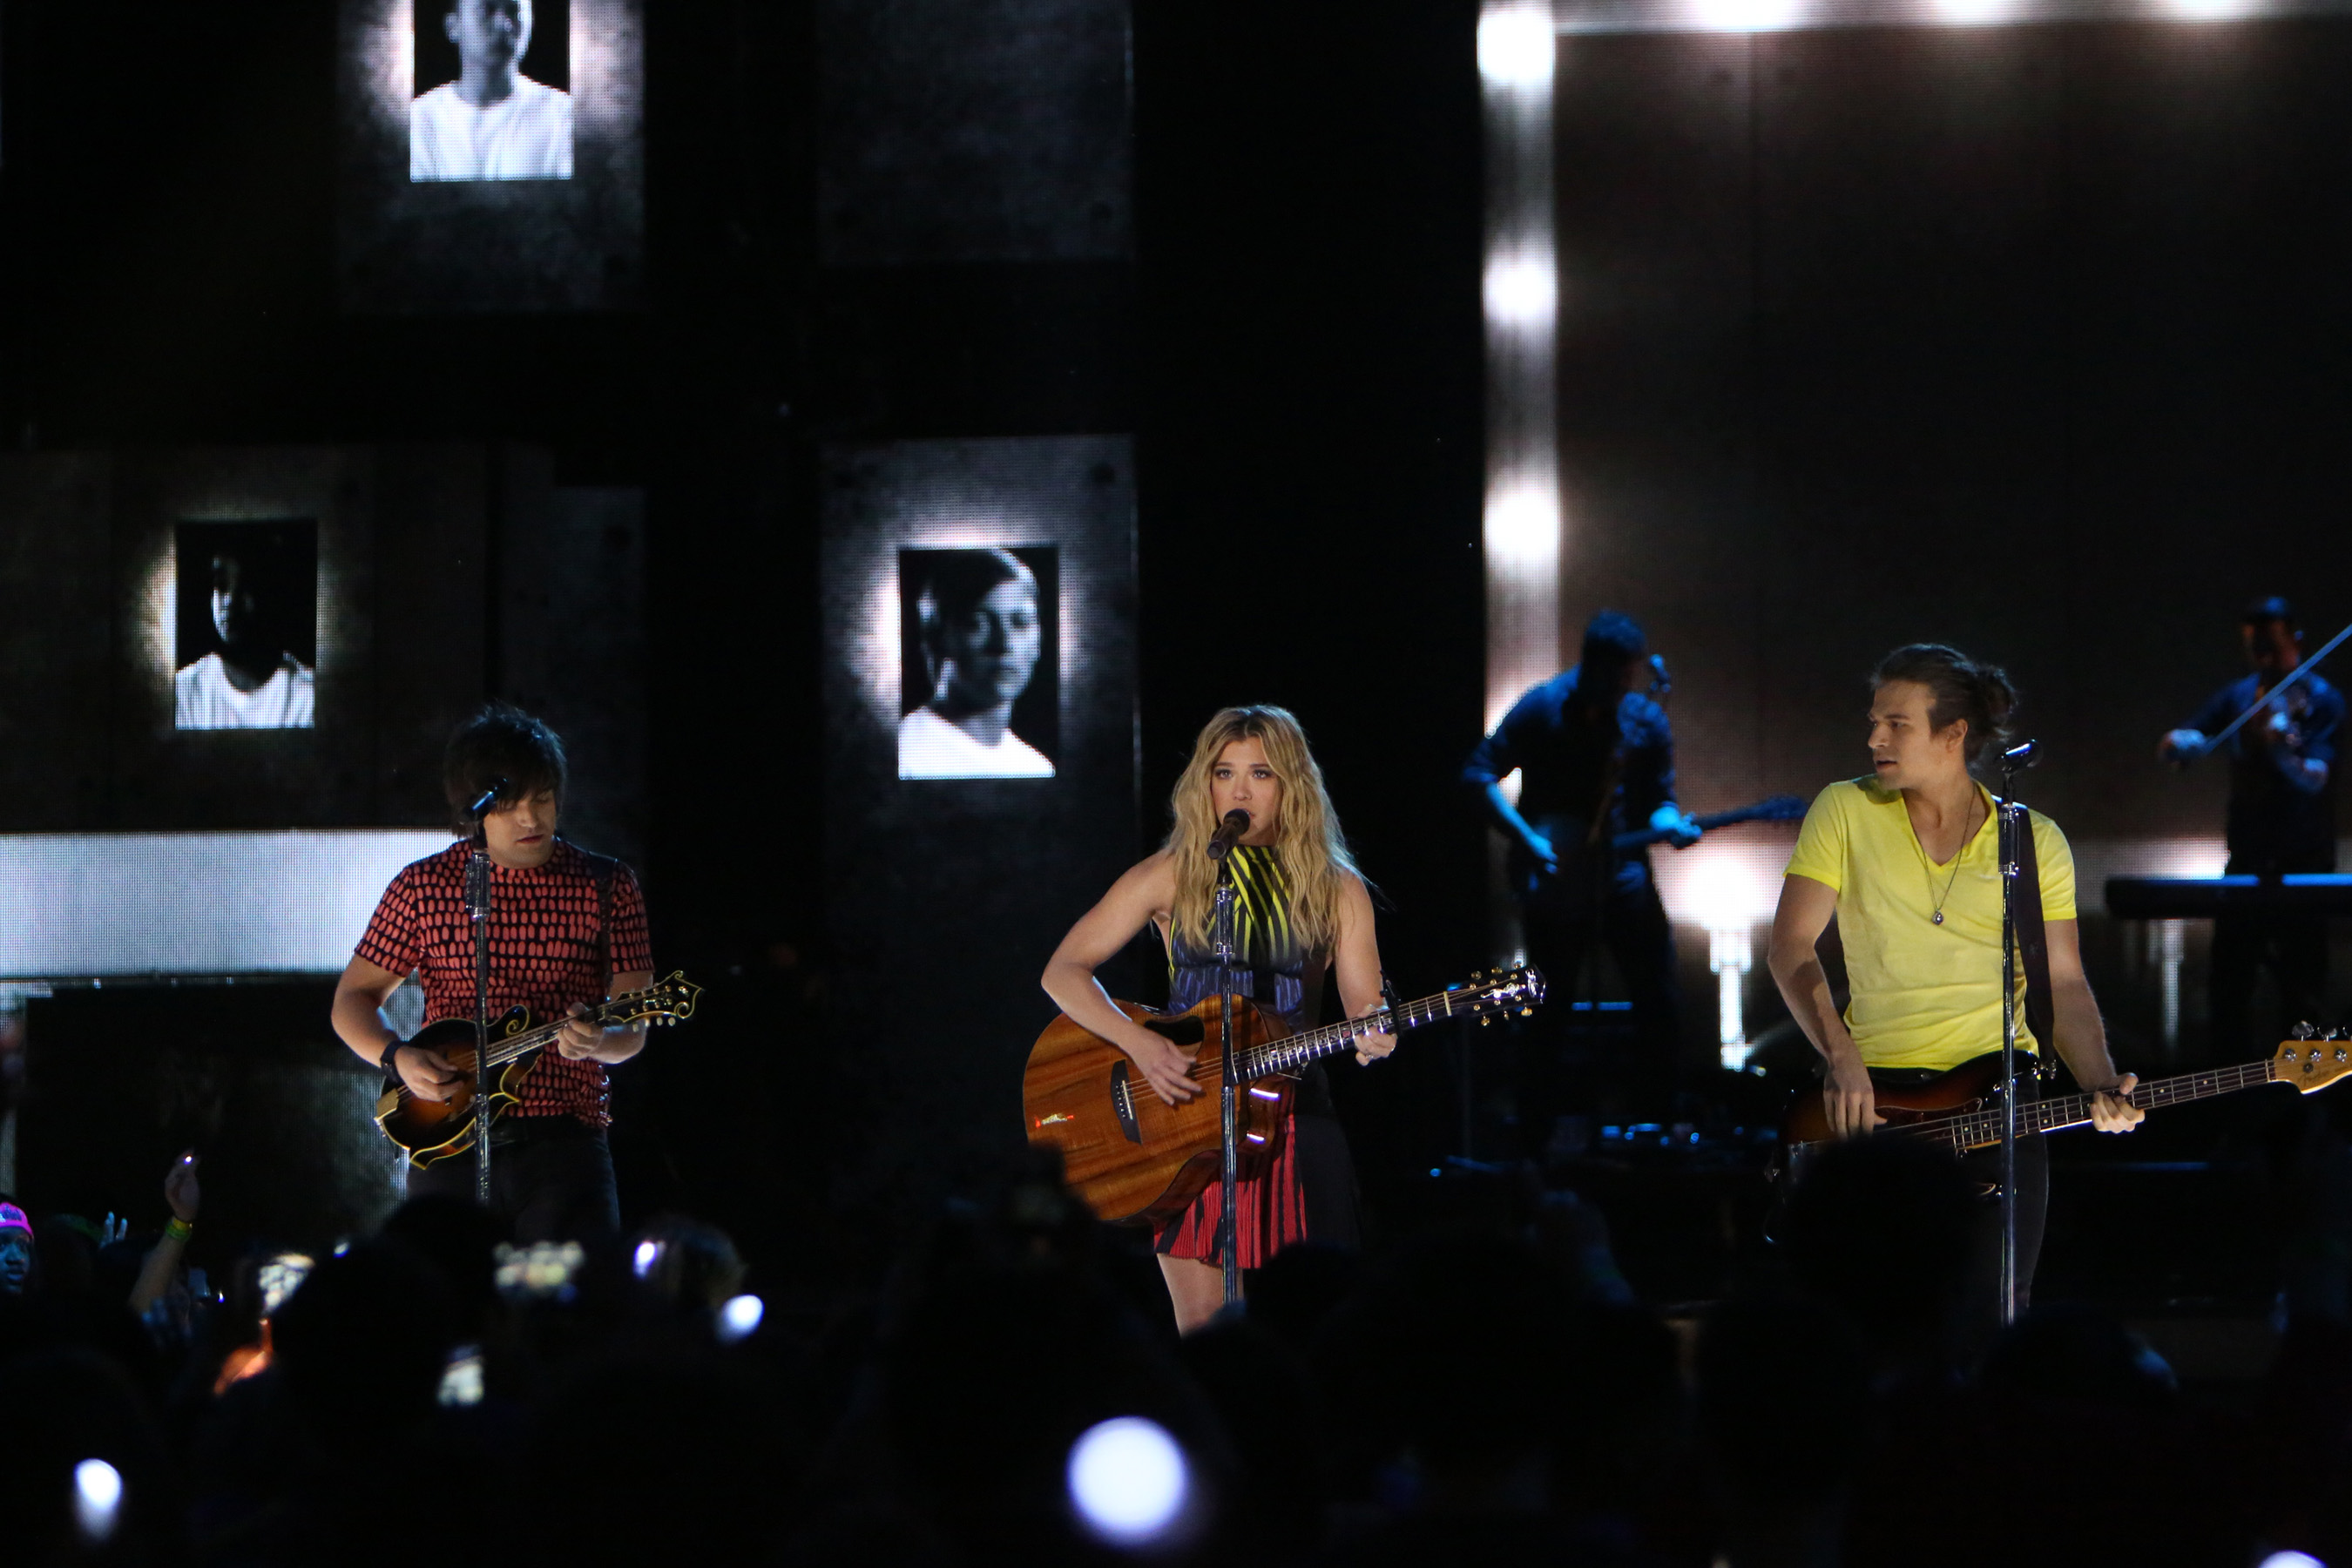 The Band Perry performs on stage at We Day. Photo Credit: Getty Images, Jeff Schear